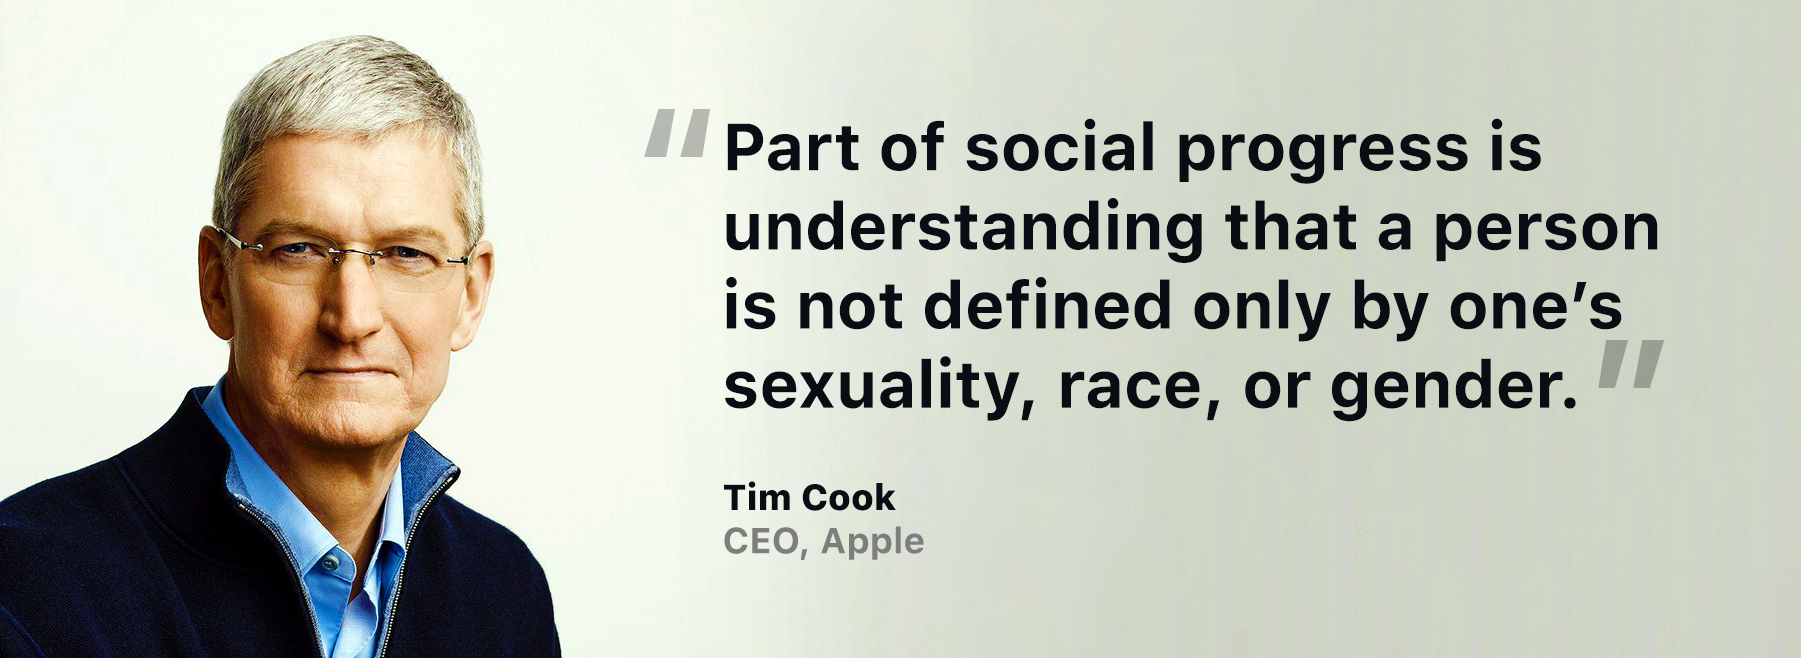 Tim cook's quote on LGBTQ inclusion in the workplace